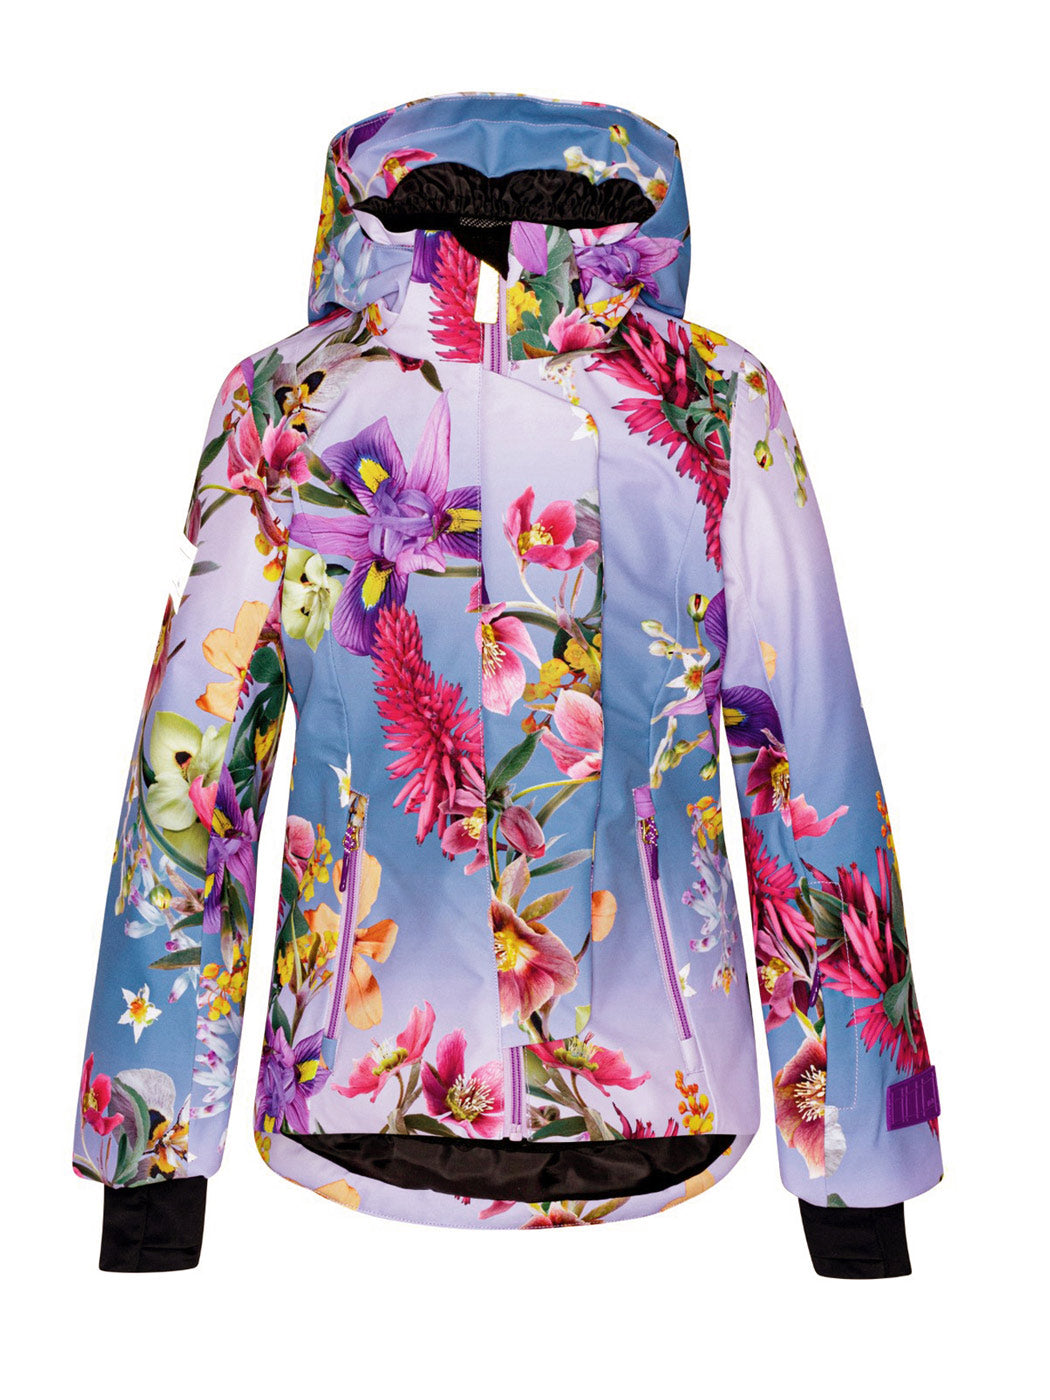 Molo Girls Jacket for ski with graphic print